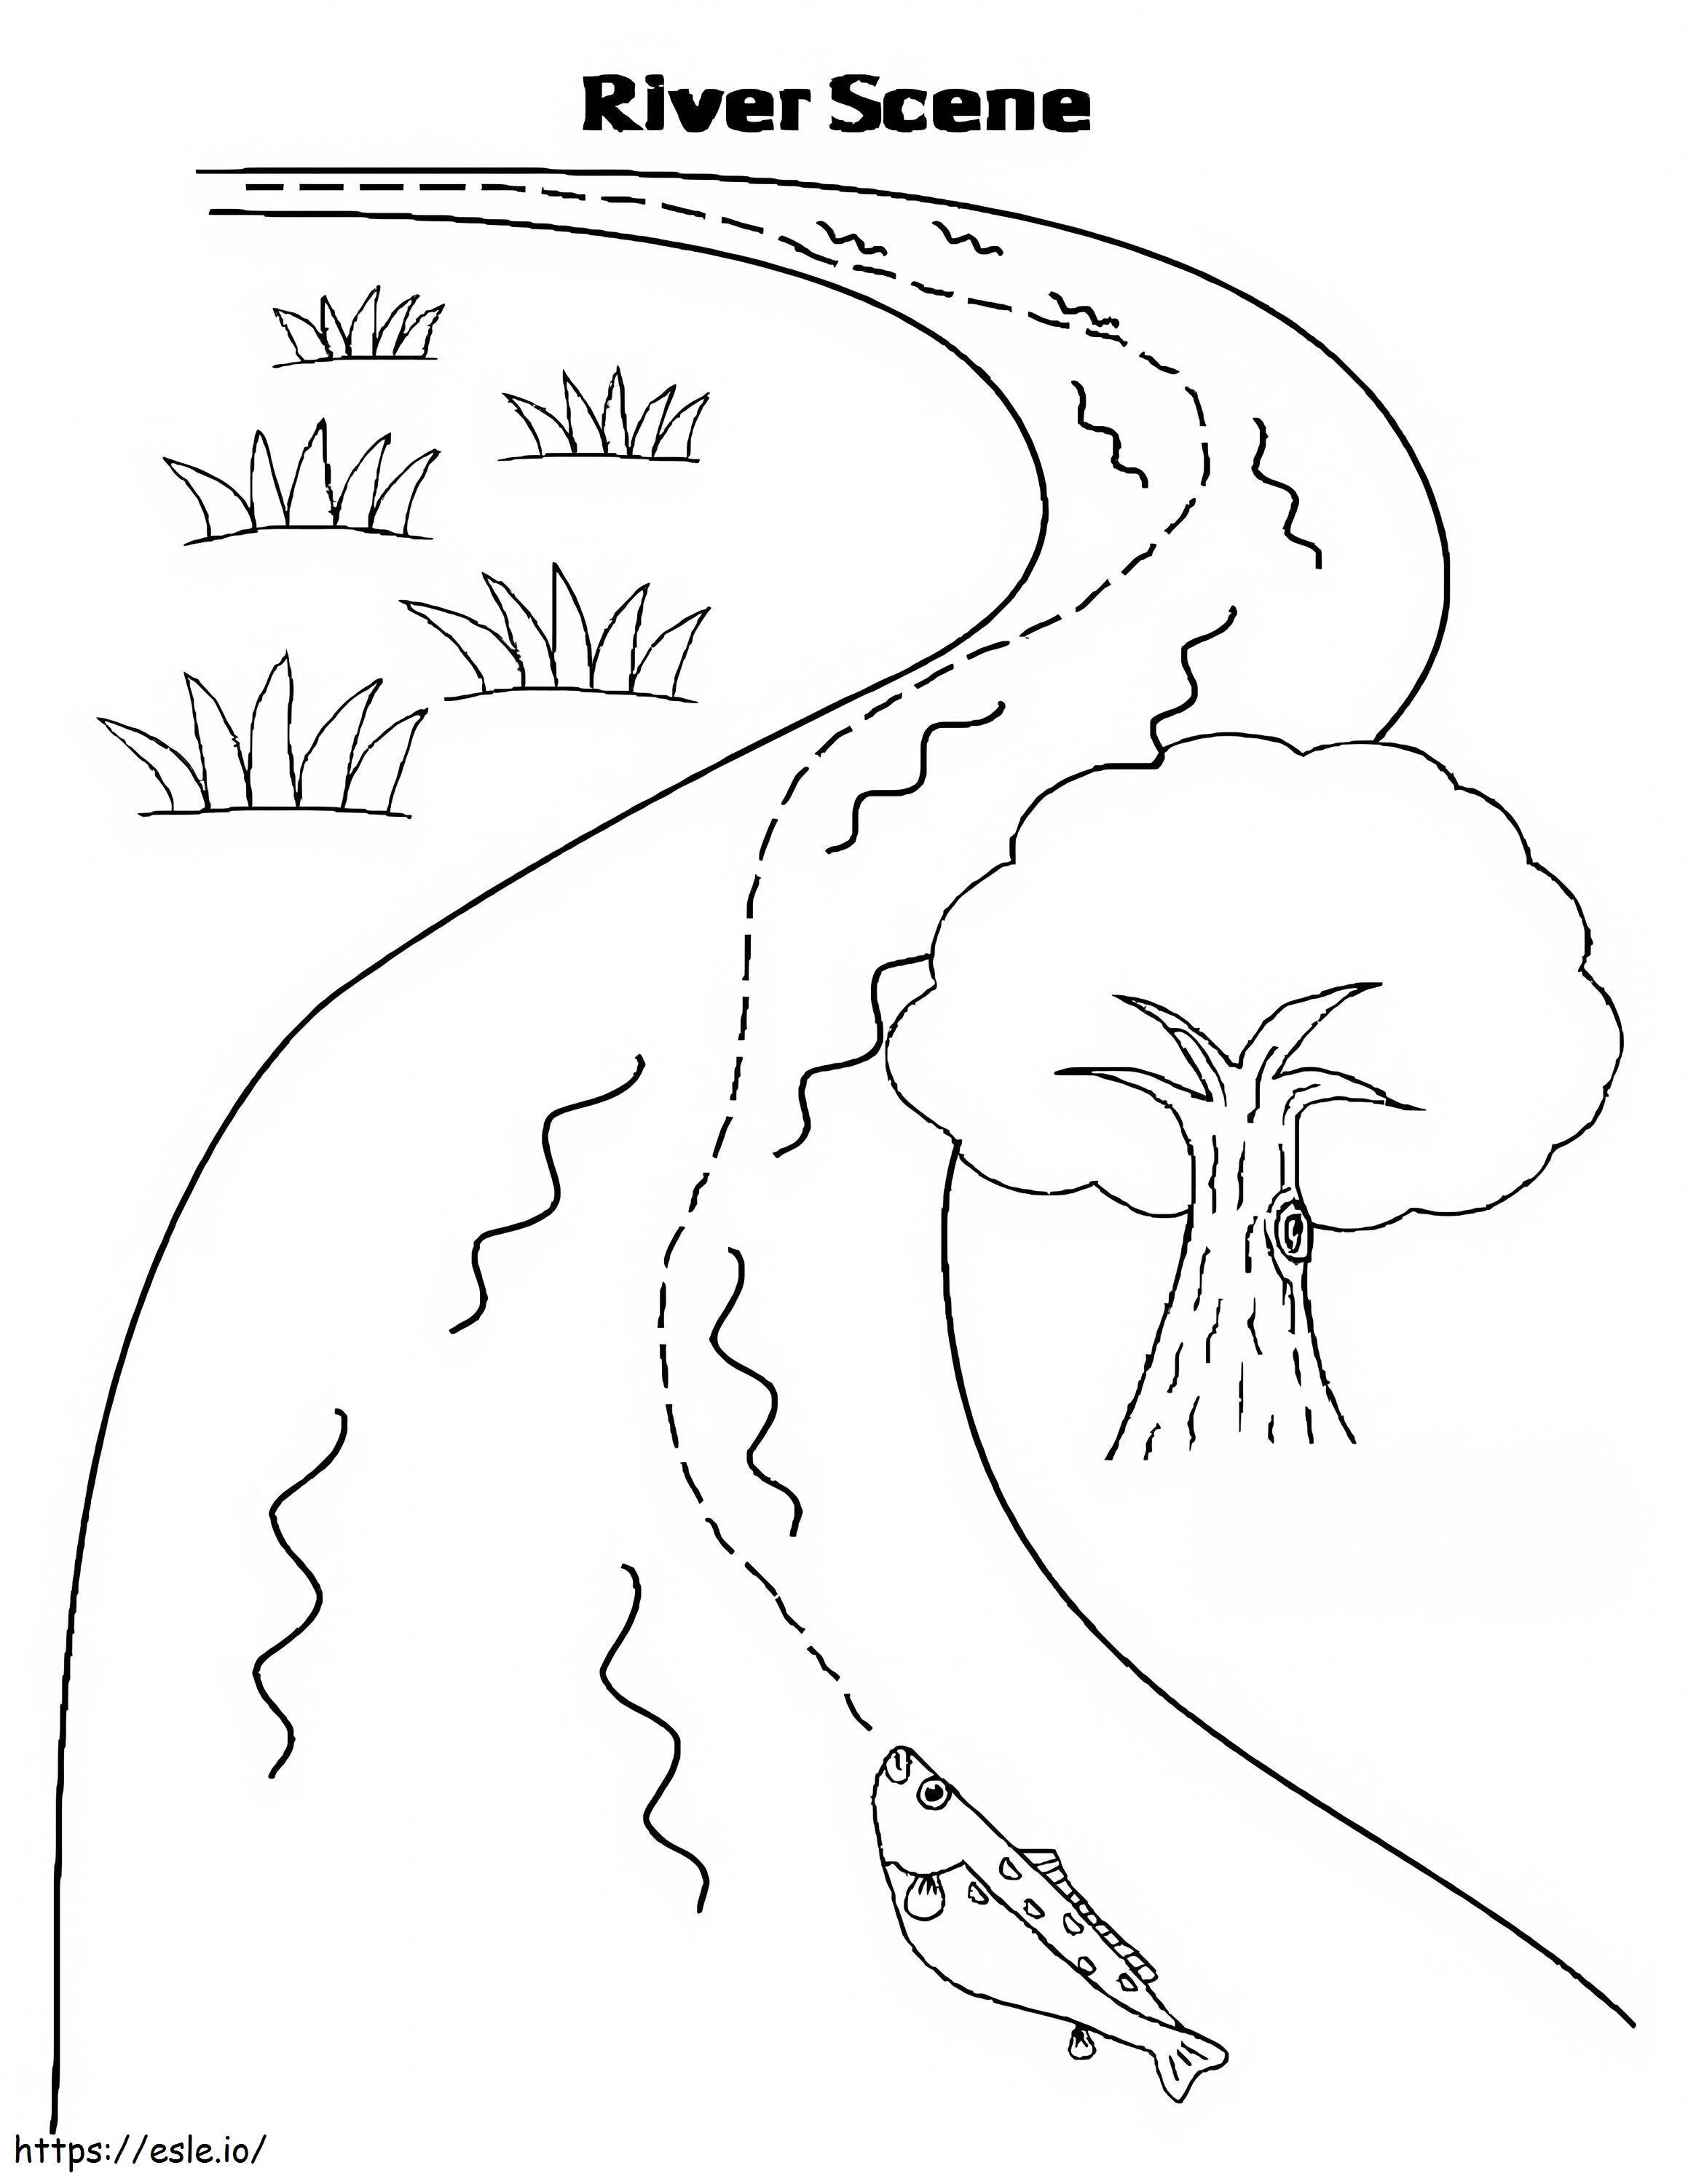 Printable River Scene coloring page